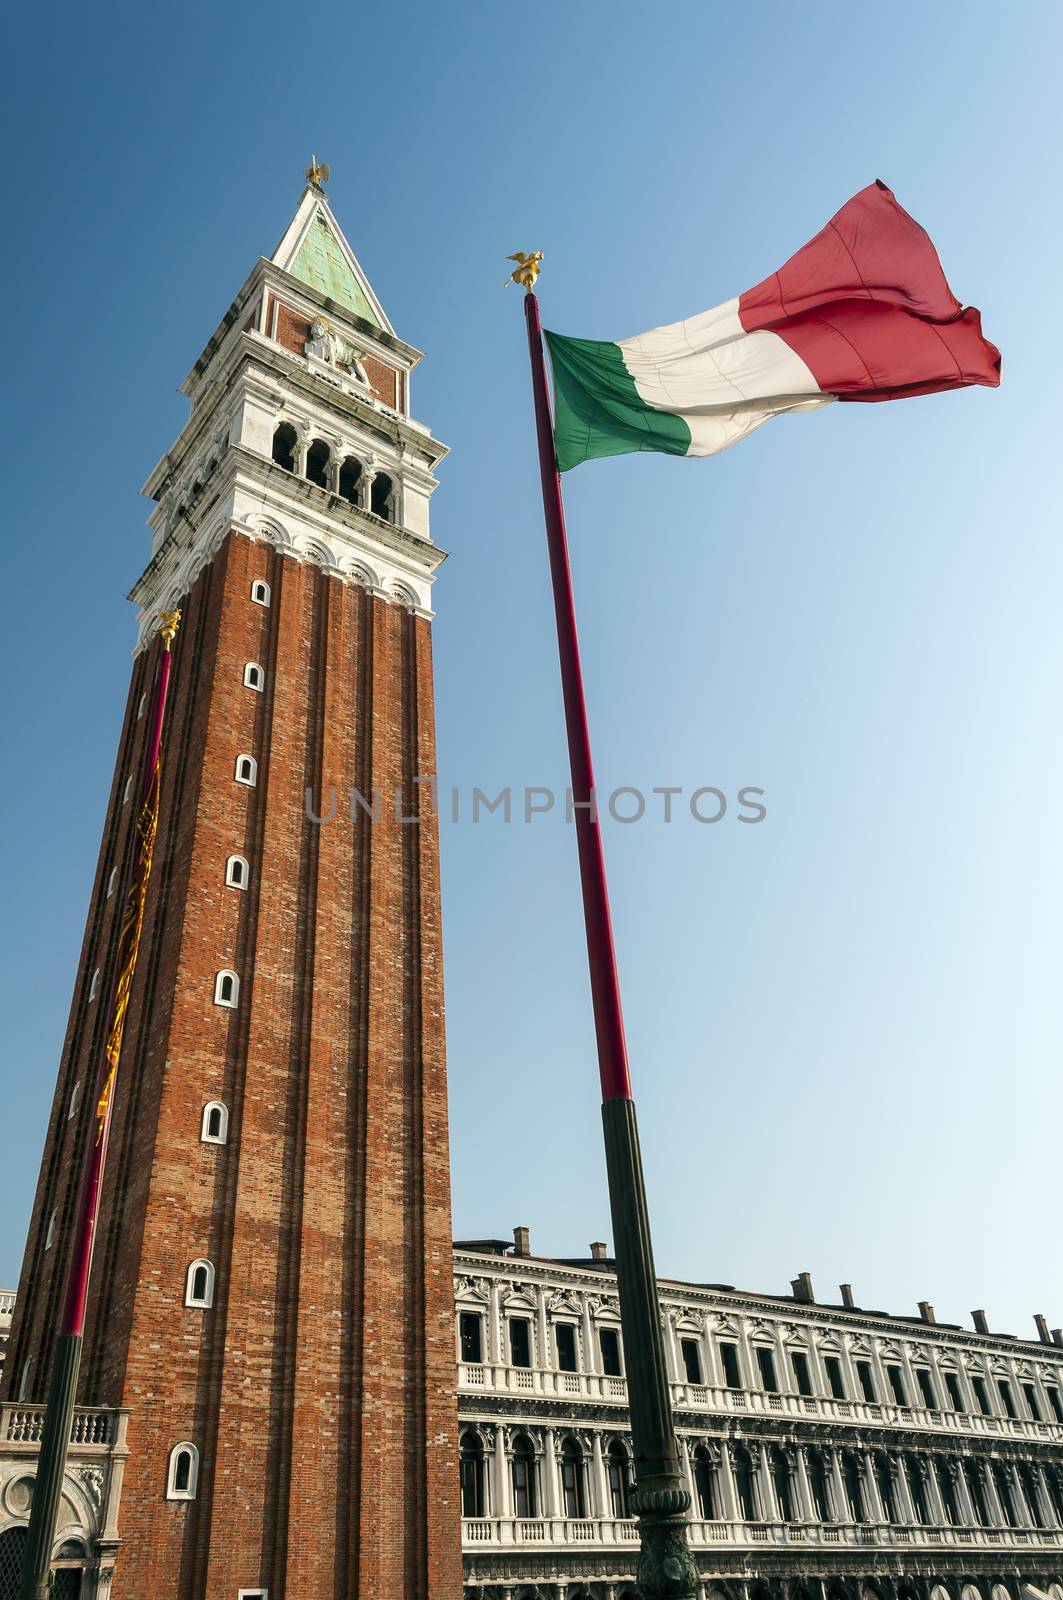 St Mark's Campanile. by FER737NG